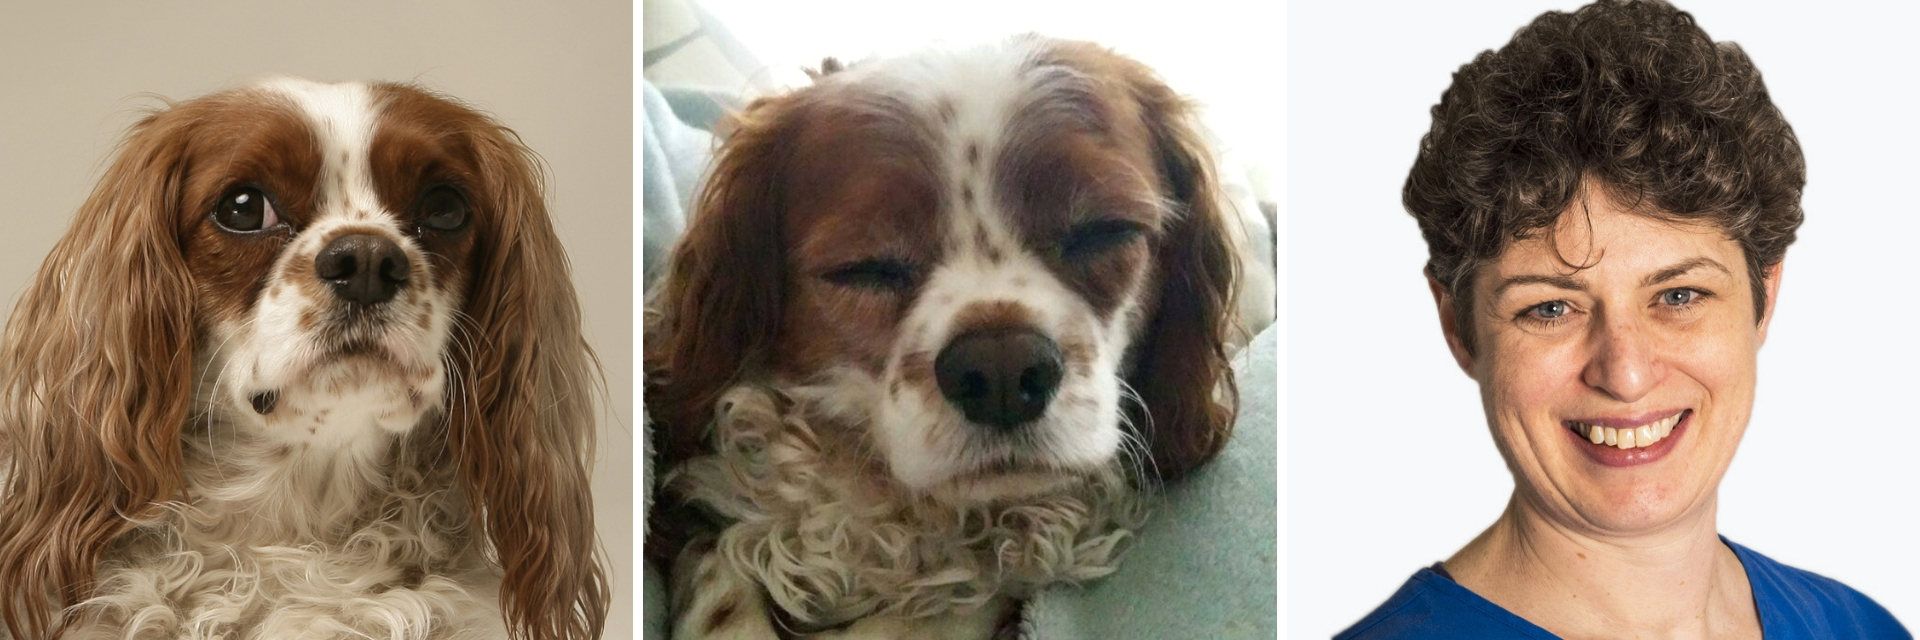 King Charles Cavalier Spaniel with Chiari-malformation associated pain